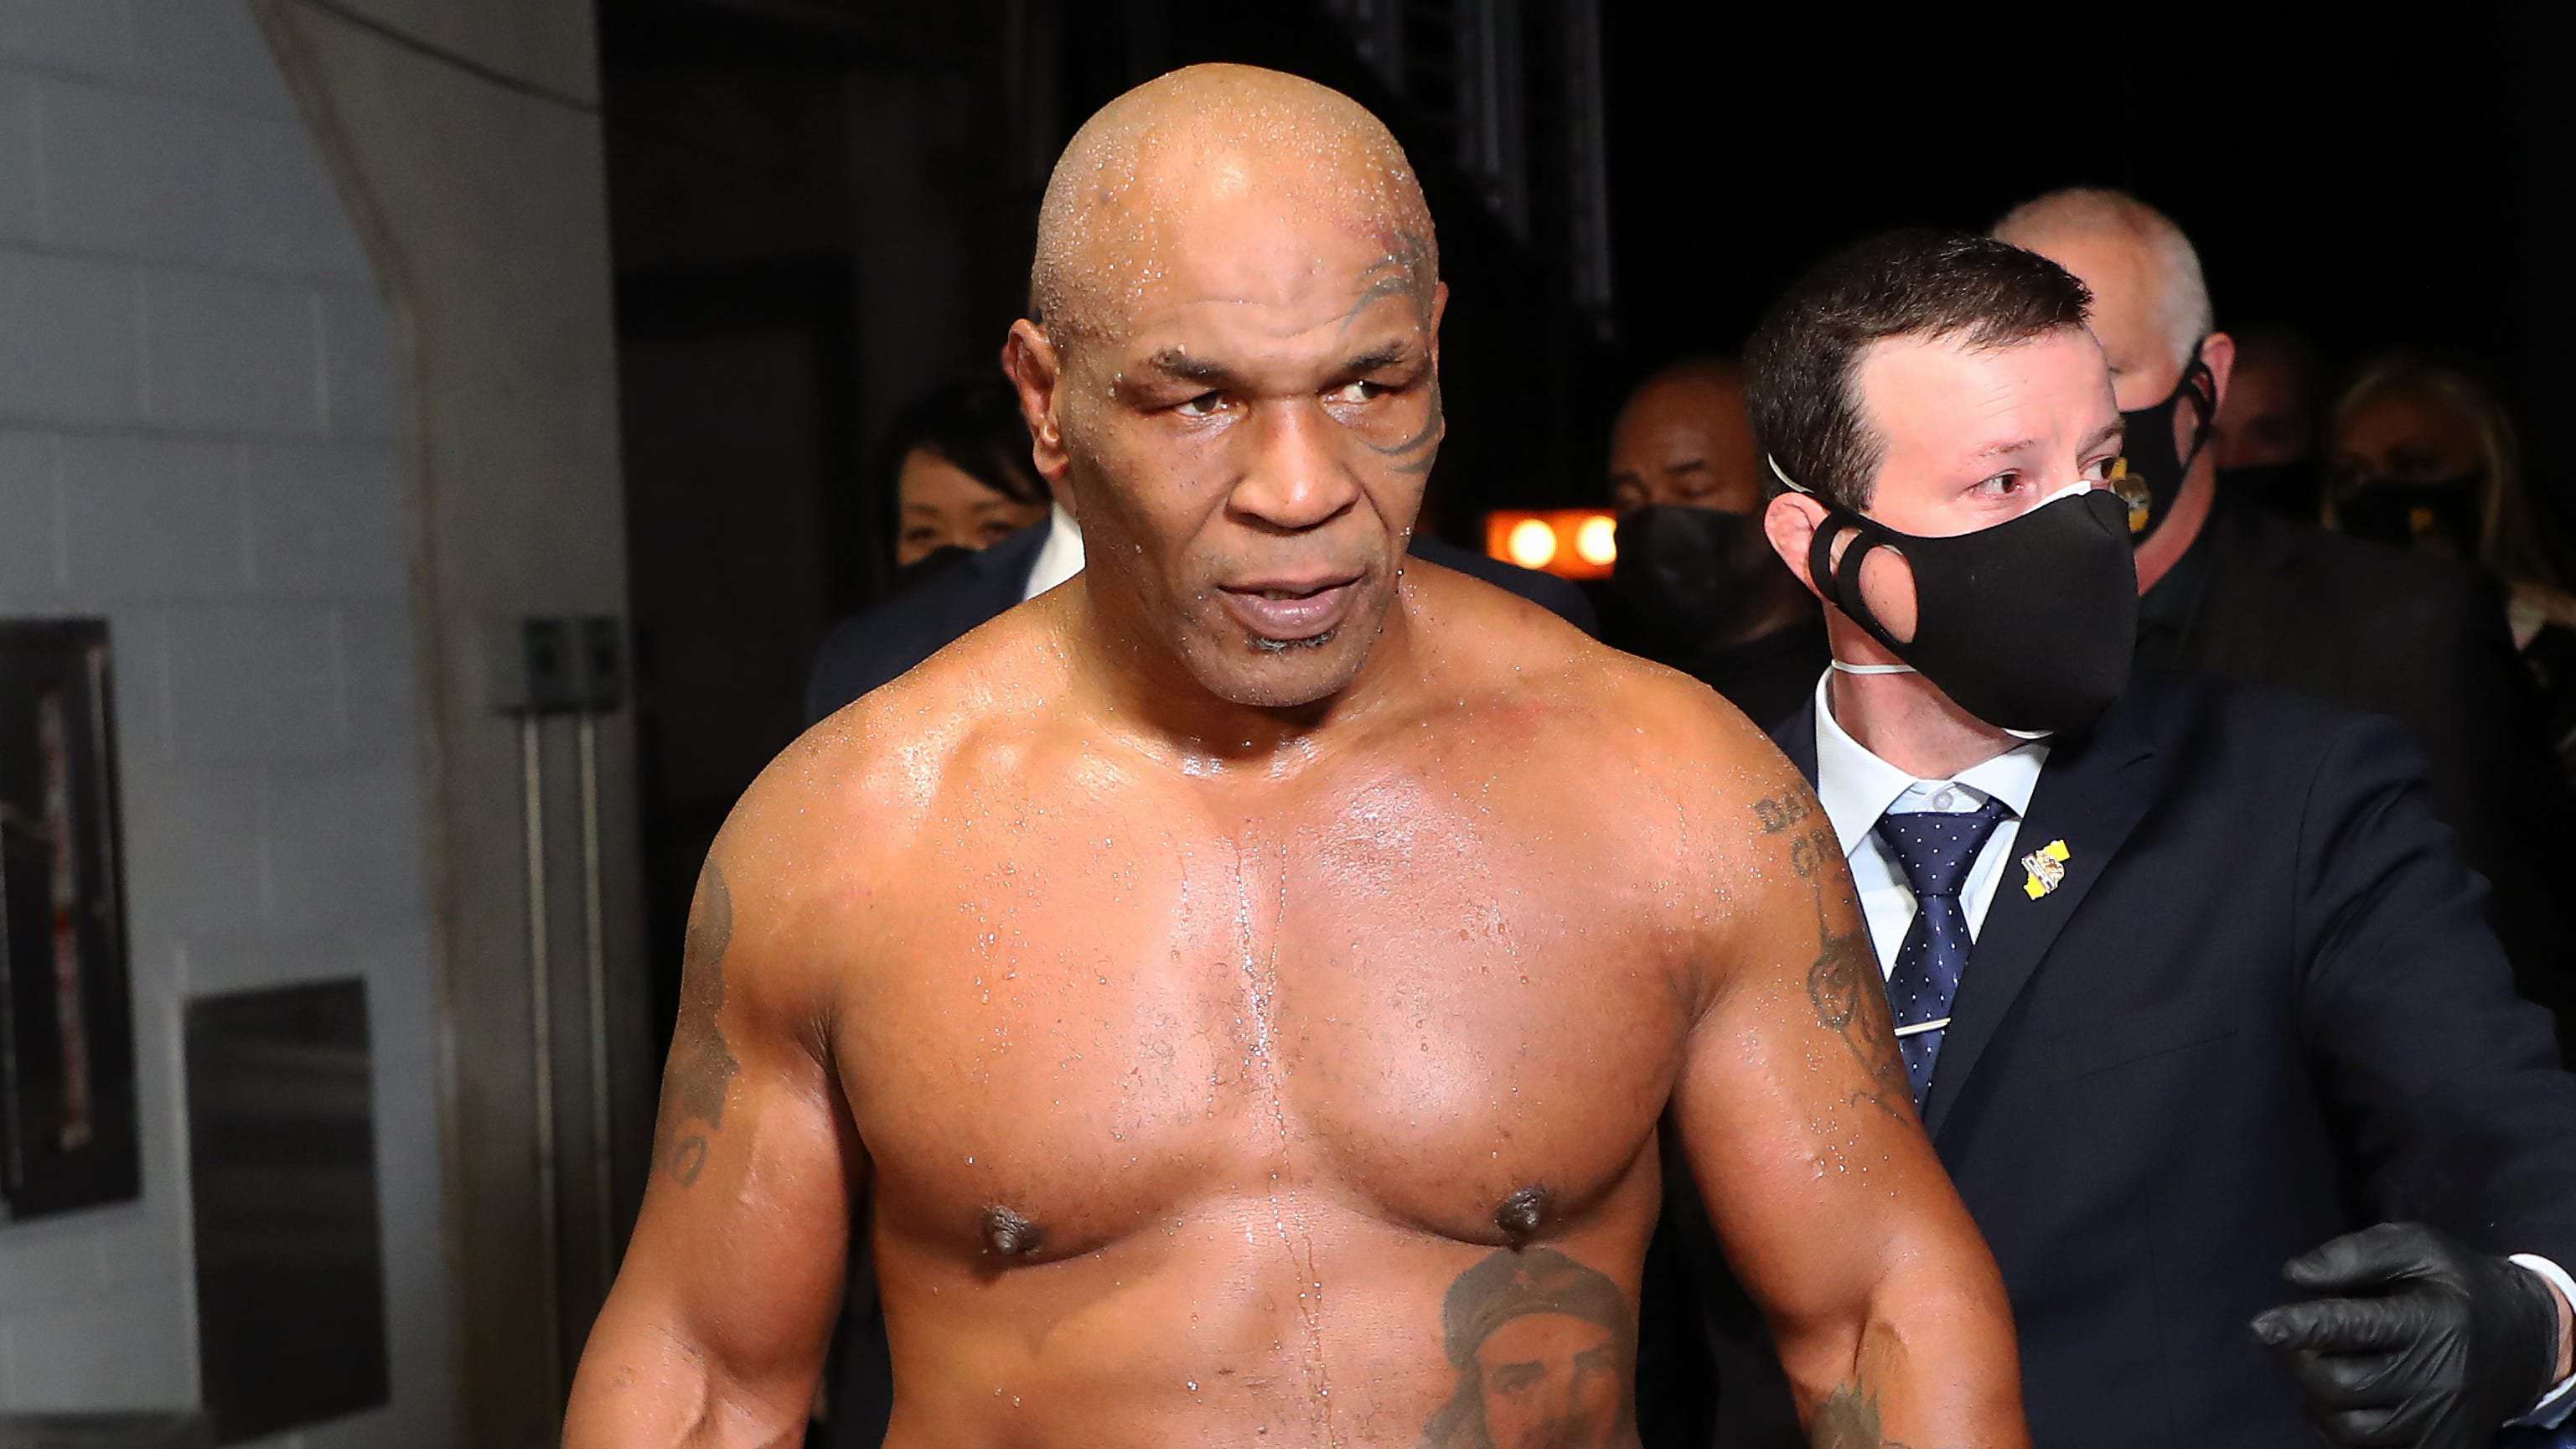 image for Mike Tyson says he smoked marijuana before fight vs. Roy Jones Jr.: 'It's just who I am'